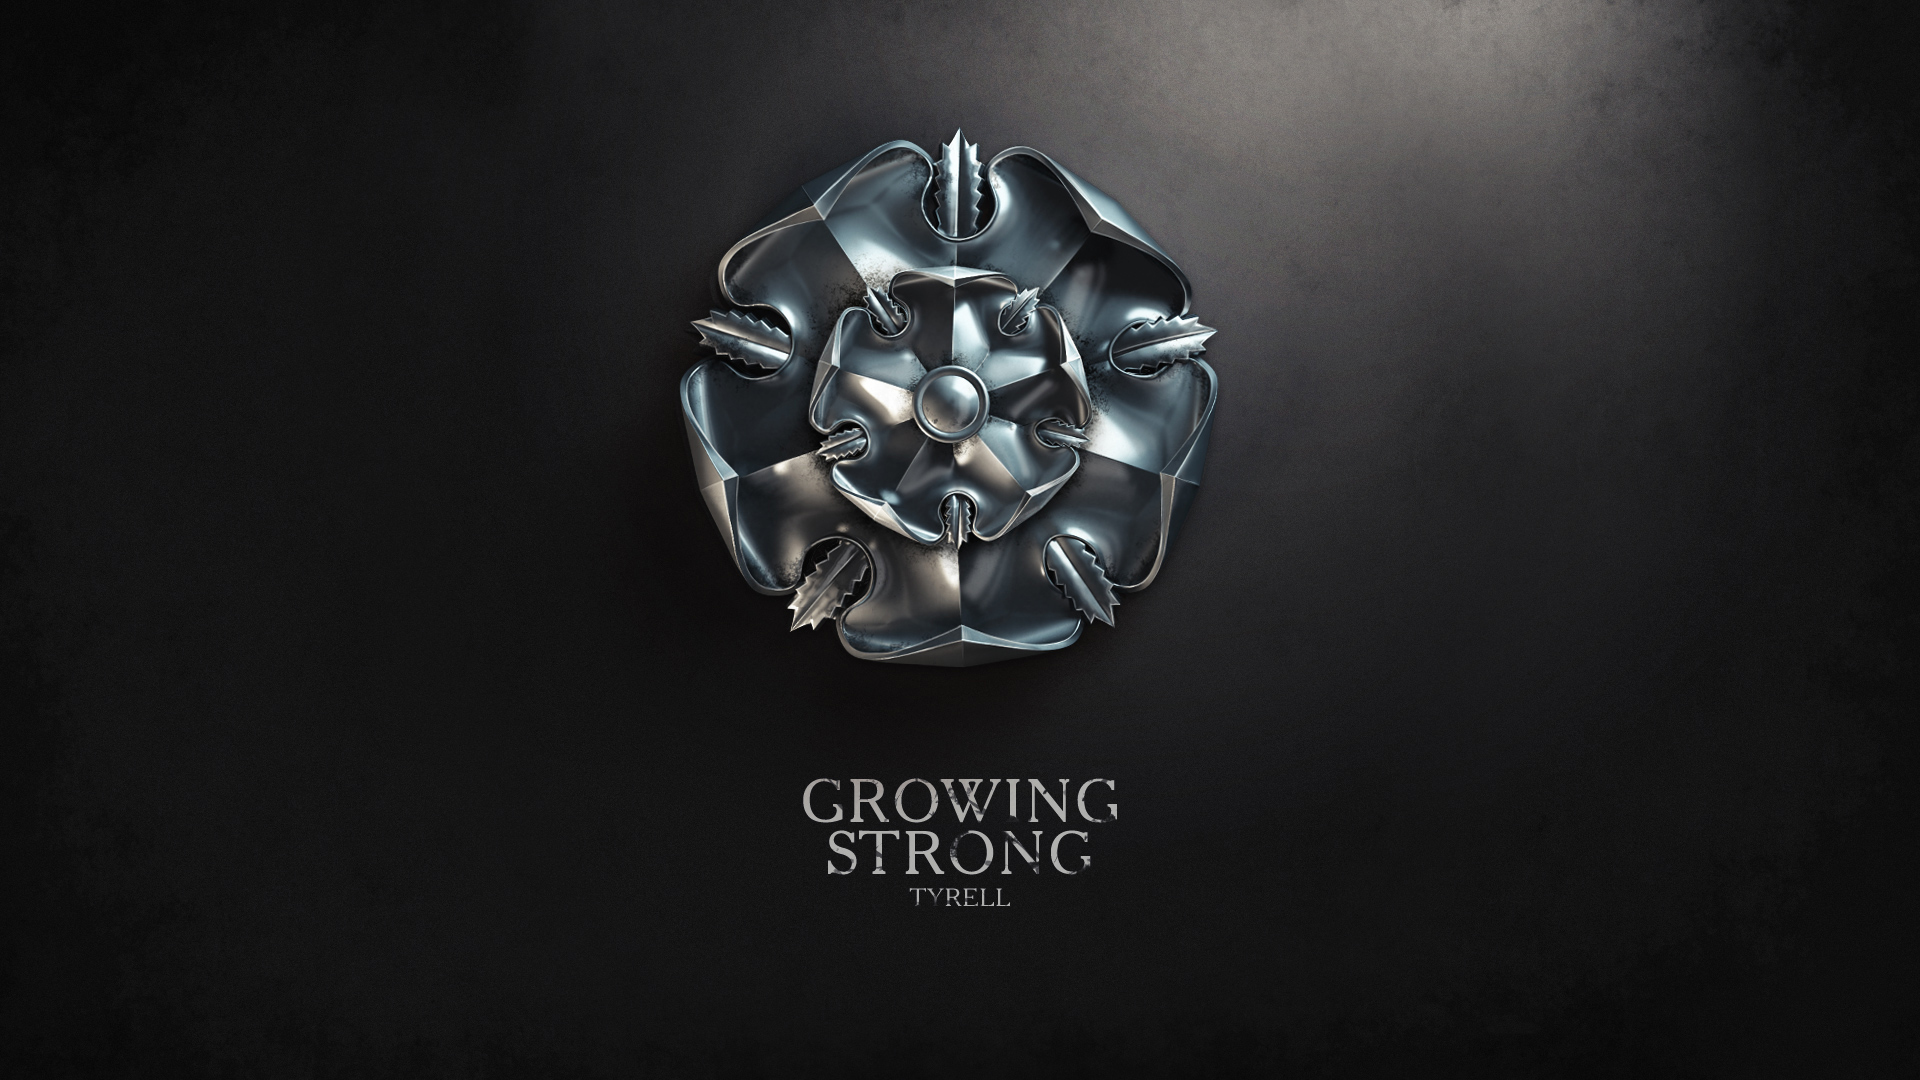 Growing Strong House Tyrell HD Wallpaper Id